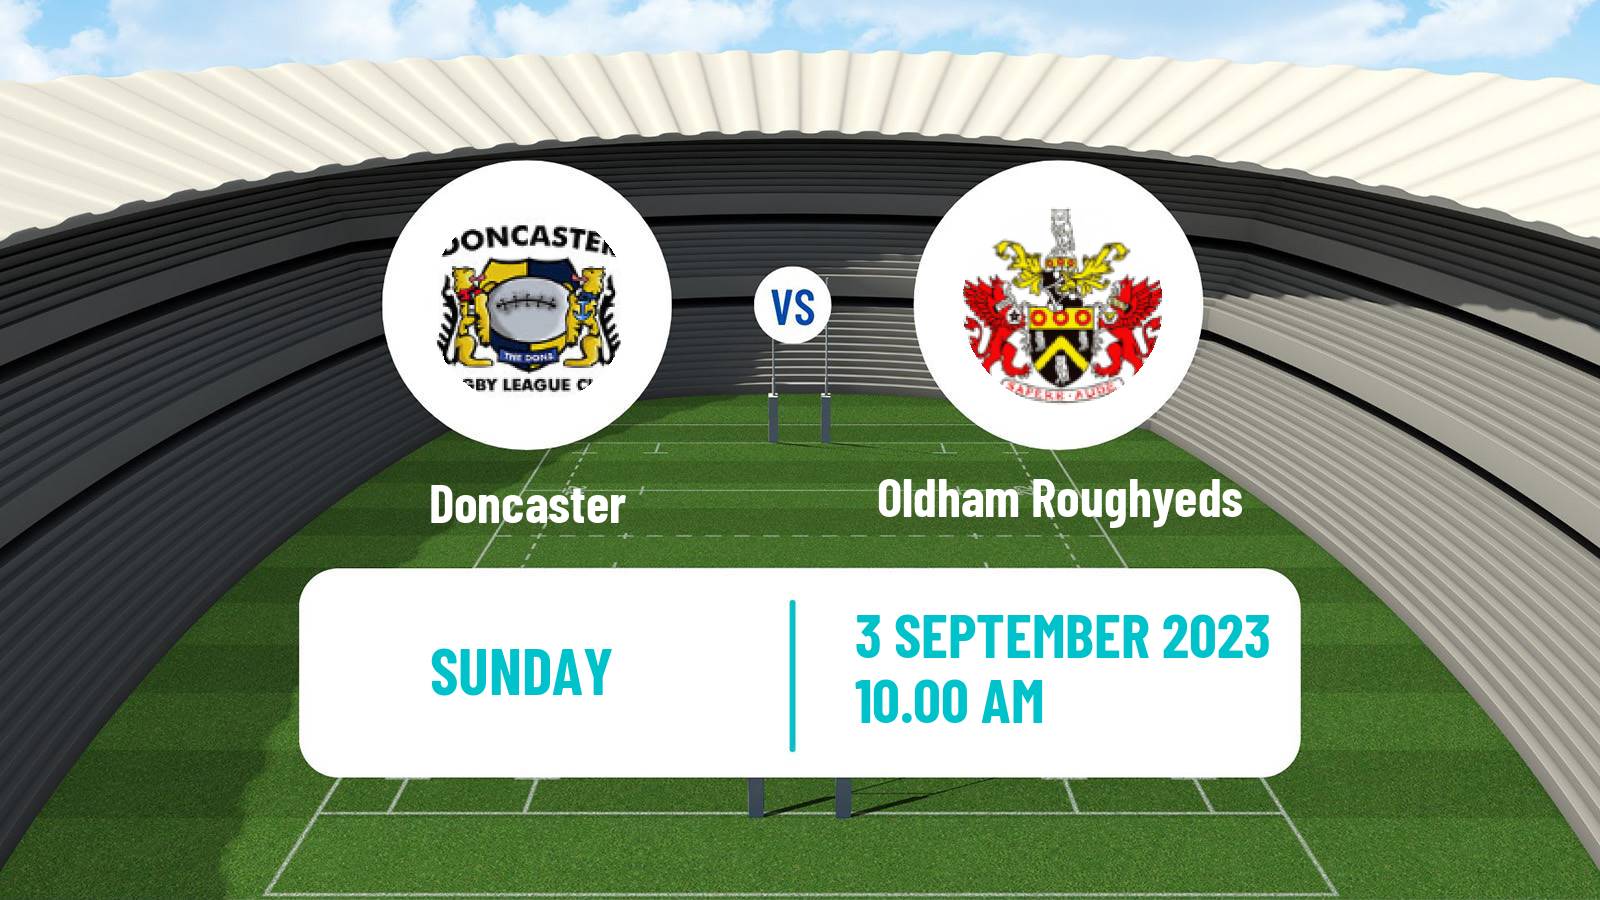 Rugby league English League 1 Rugby League Doncaster - Oldham Roughyeds